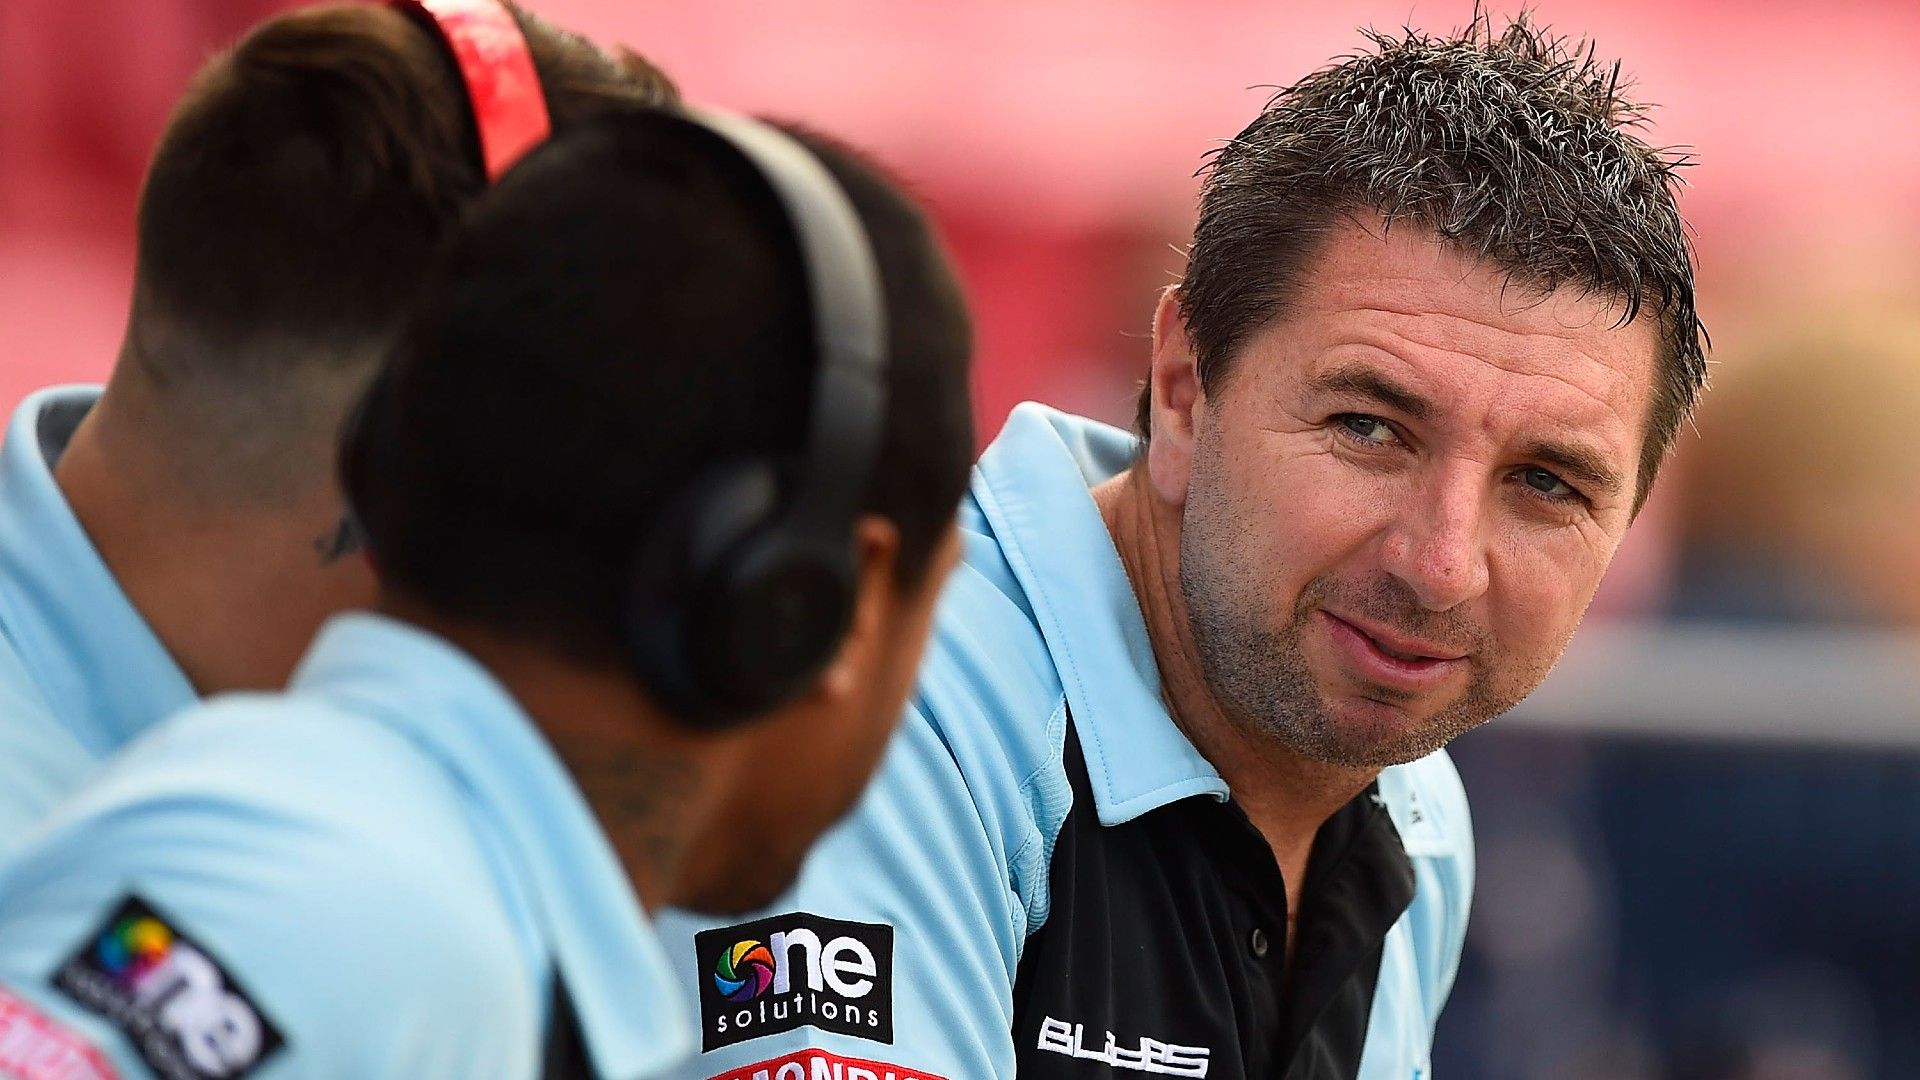 LIVE: Sharks bolster staff ahead of key game